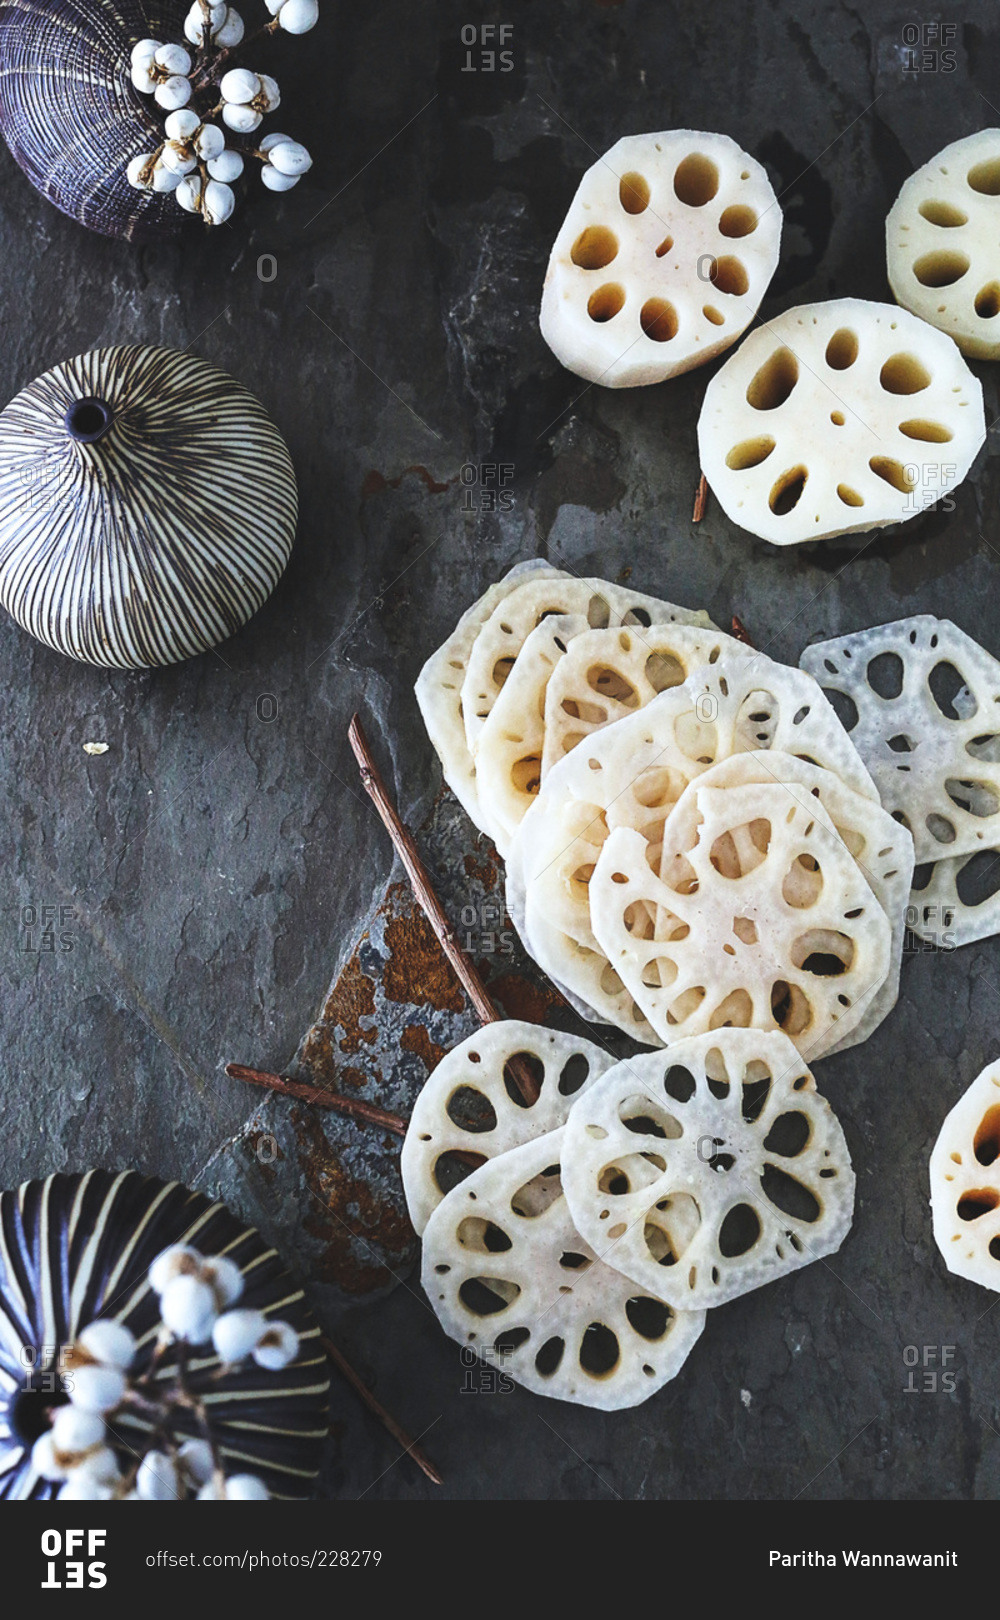 Slices of lotus root